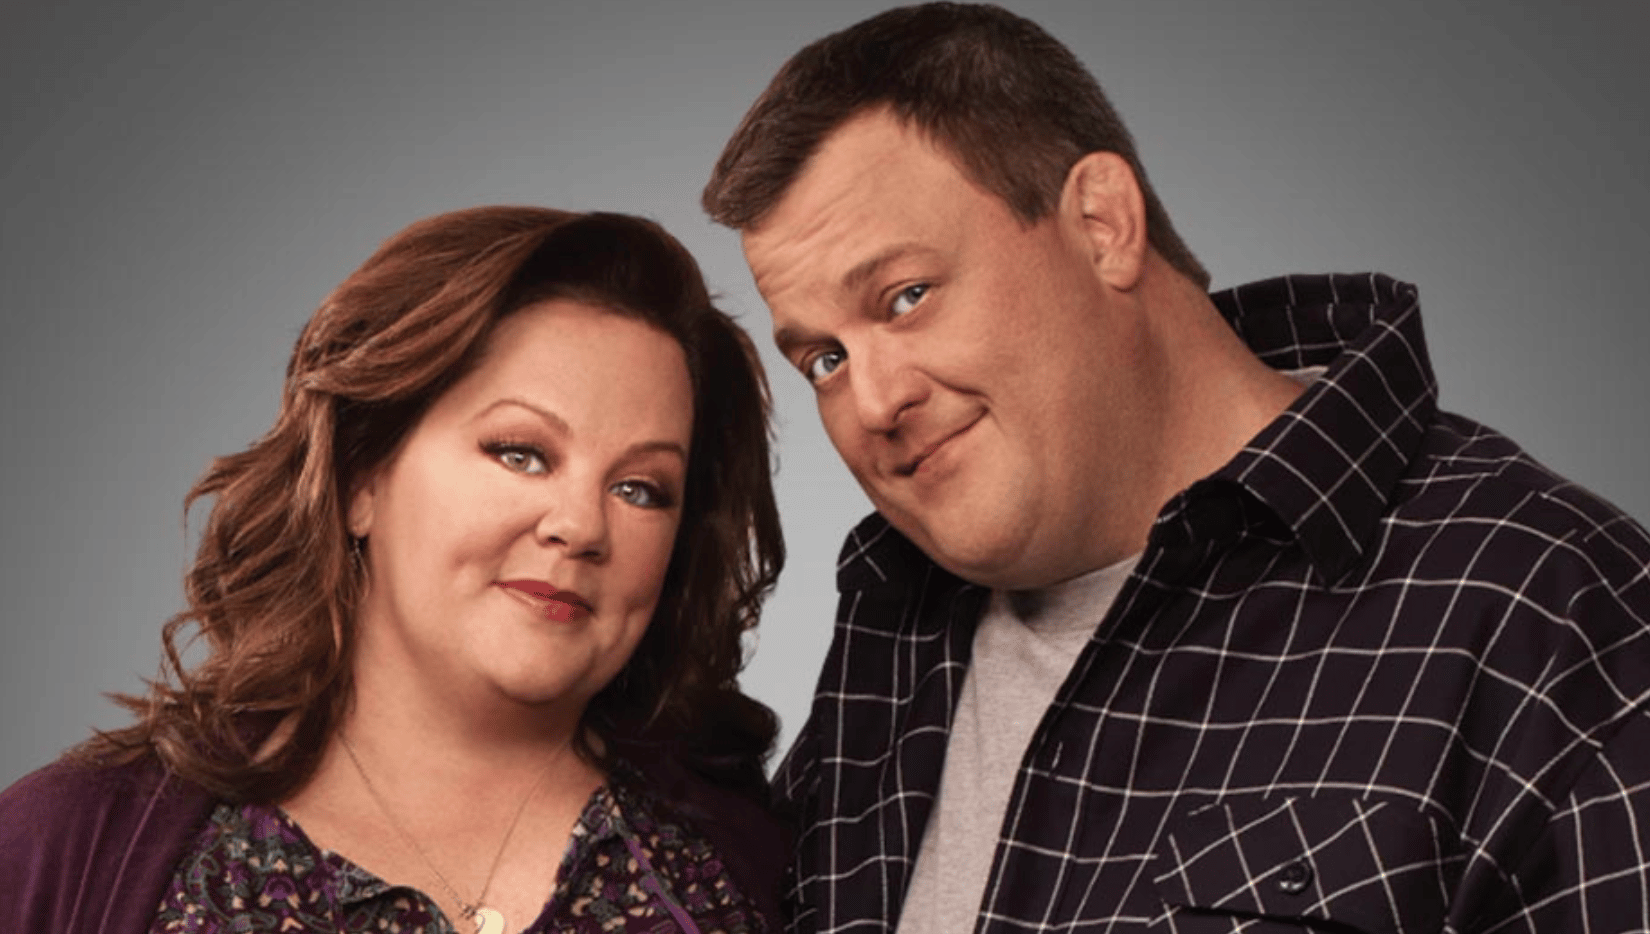 Promo shot of Mike & Molly 